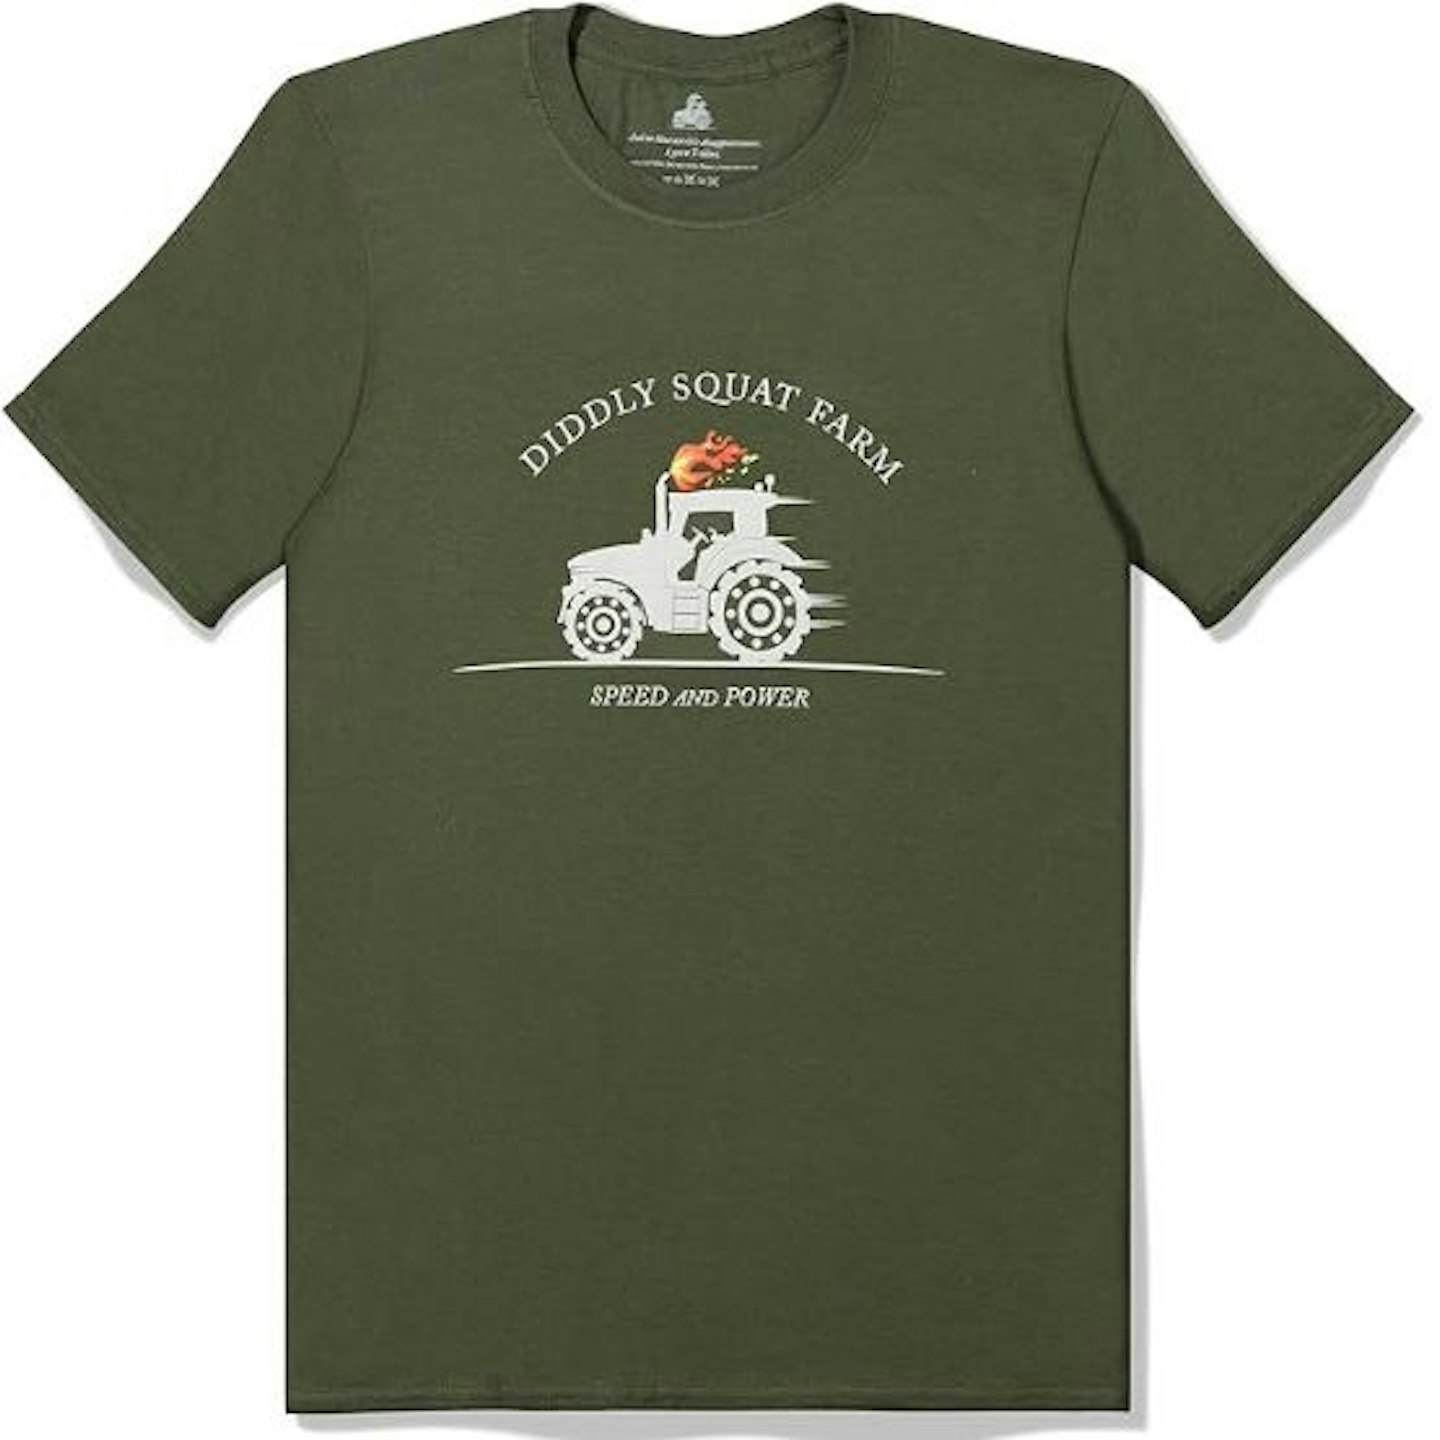 Diddly Squat Farm Tractor T-Shirt